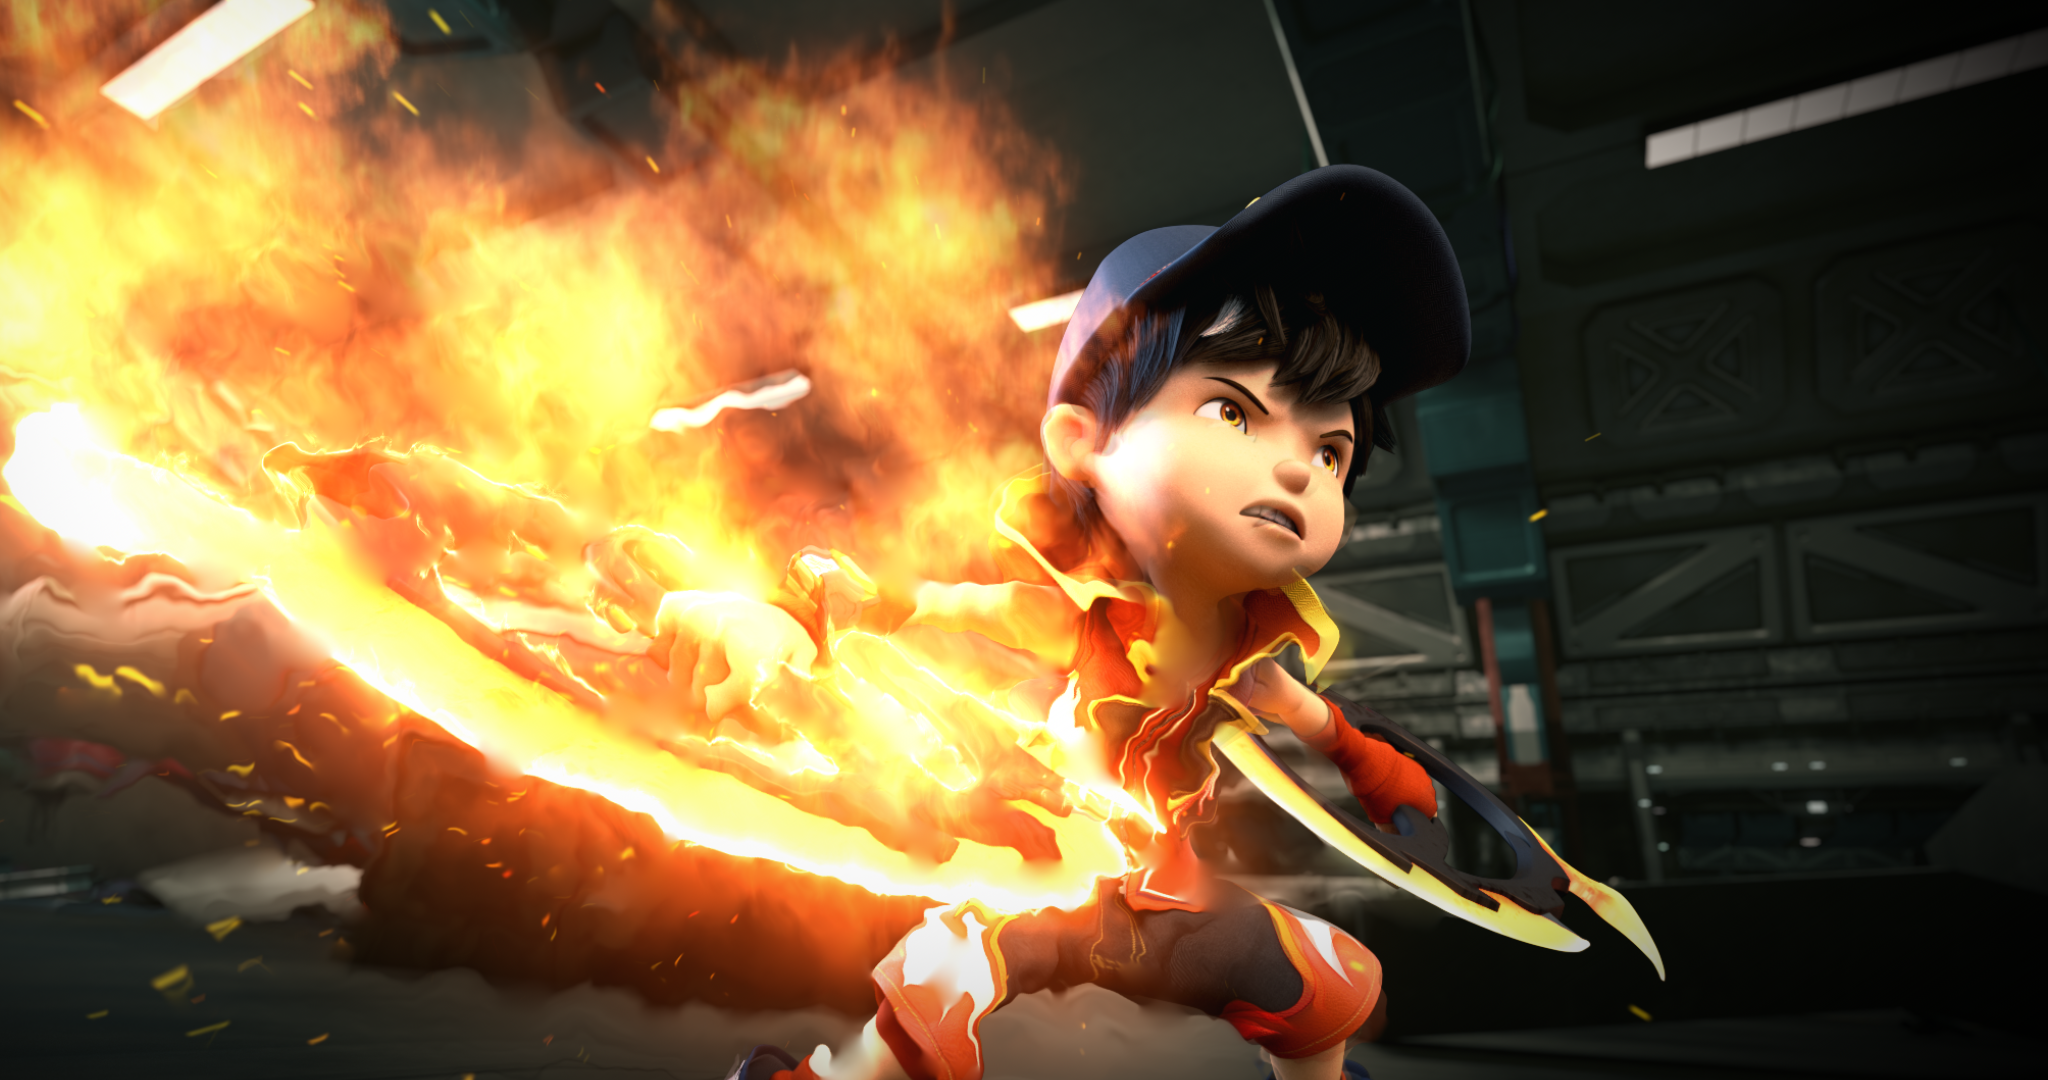 Boboiboy Movie 2 To Be Released In 5 Countries With Much Sensation In This Summer Fox Render Farm